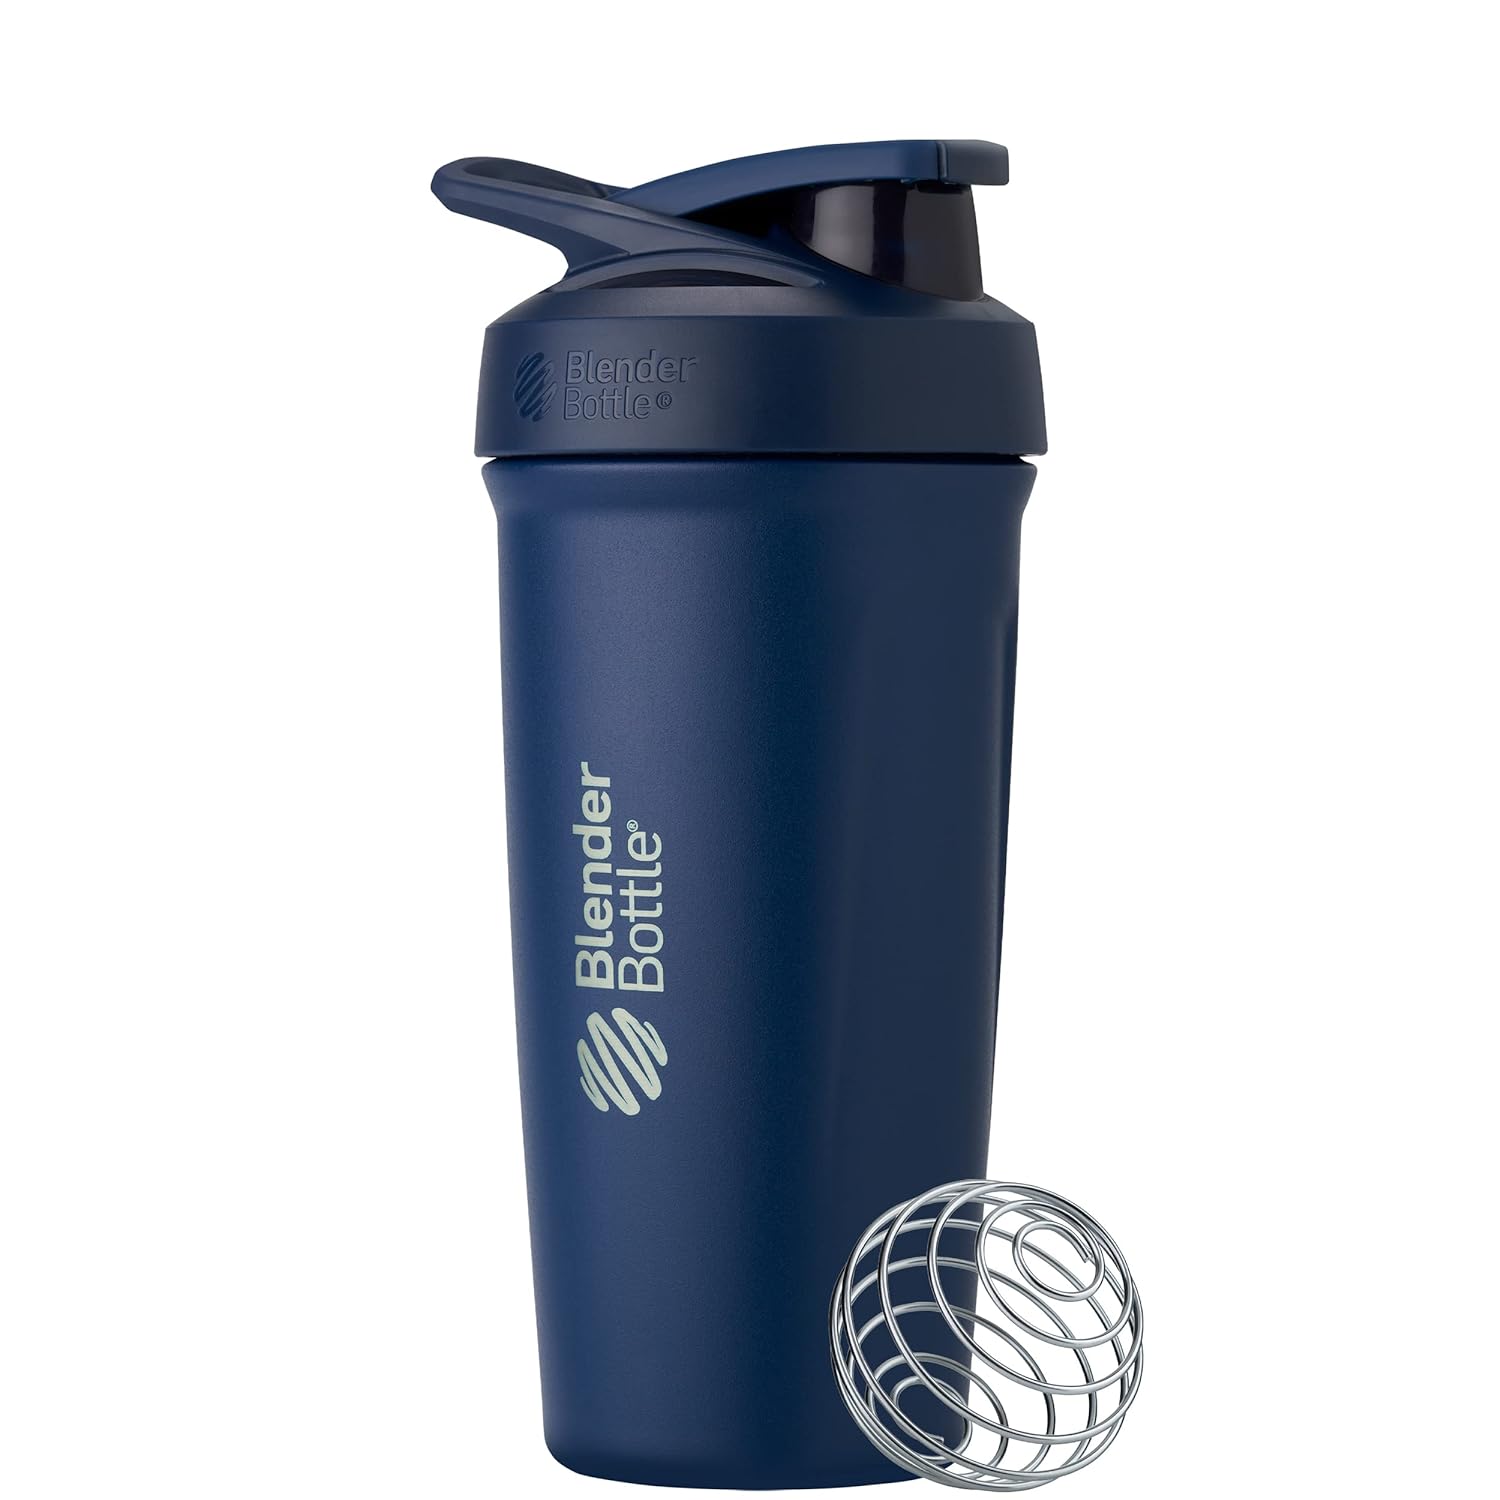 BlenderBottle Strada Shaker Cup Insulated Stainless Steel Water Bottle with Wire Whisk, 24-Ounce, Navy